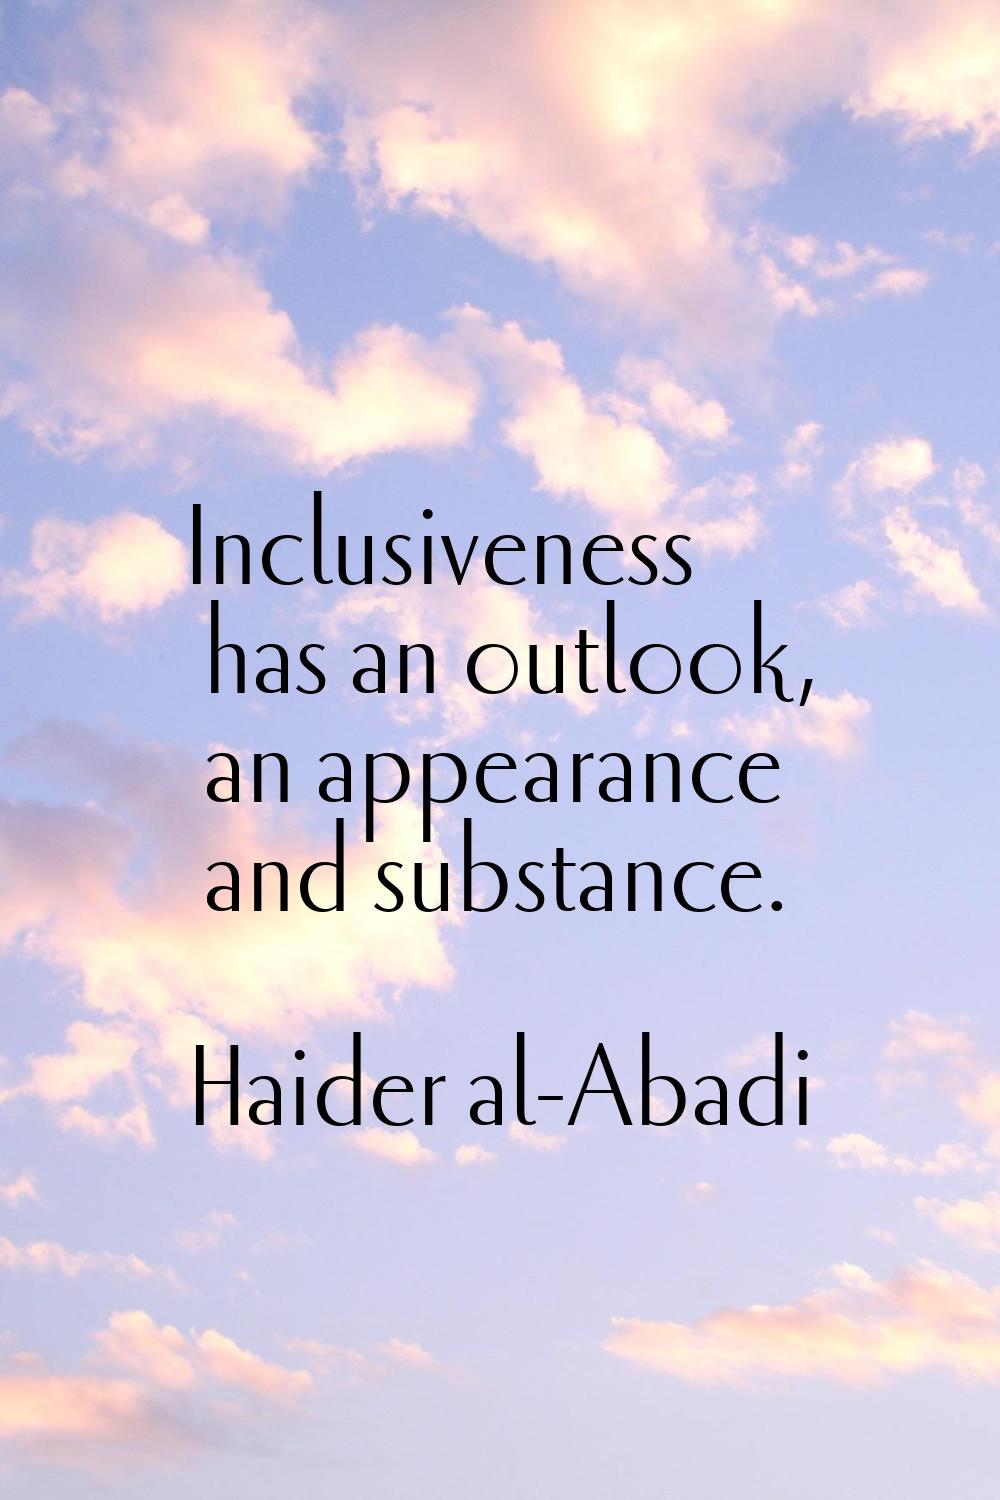 Inclusiveness has an outlook, an appearance and substance.